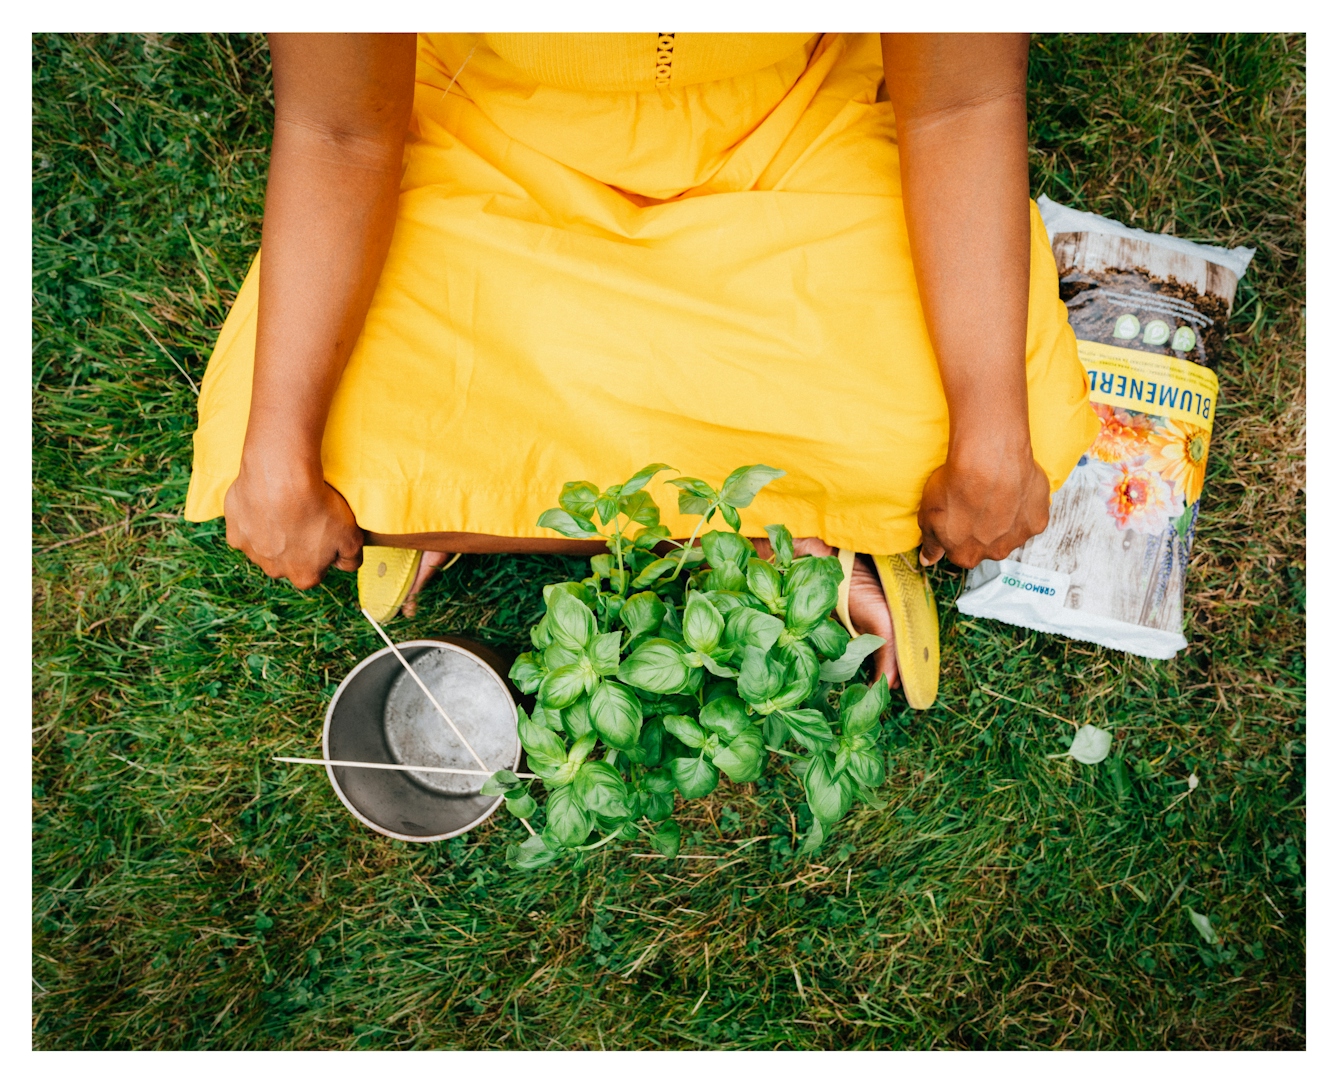 Colour photograph of the arms and legs of a woman wearing a long, flowing yellow dress and sitting cross-legged on some grass. Her hands are placed on her knees and she is wearing yellow flip flops. She is sat in front of a basil plant and an empty metallic pot. There is a sealed plastic bag of compost to her left. 